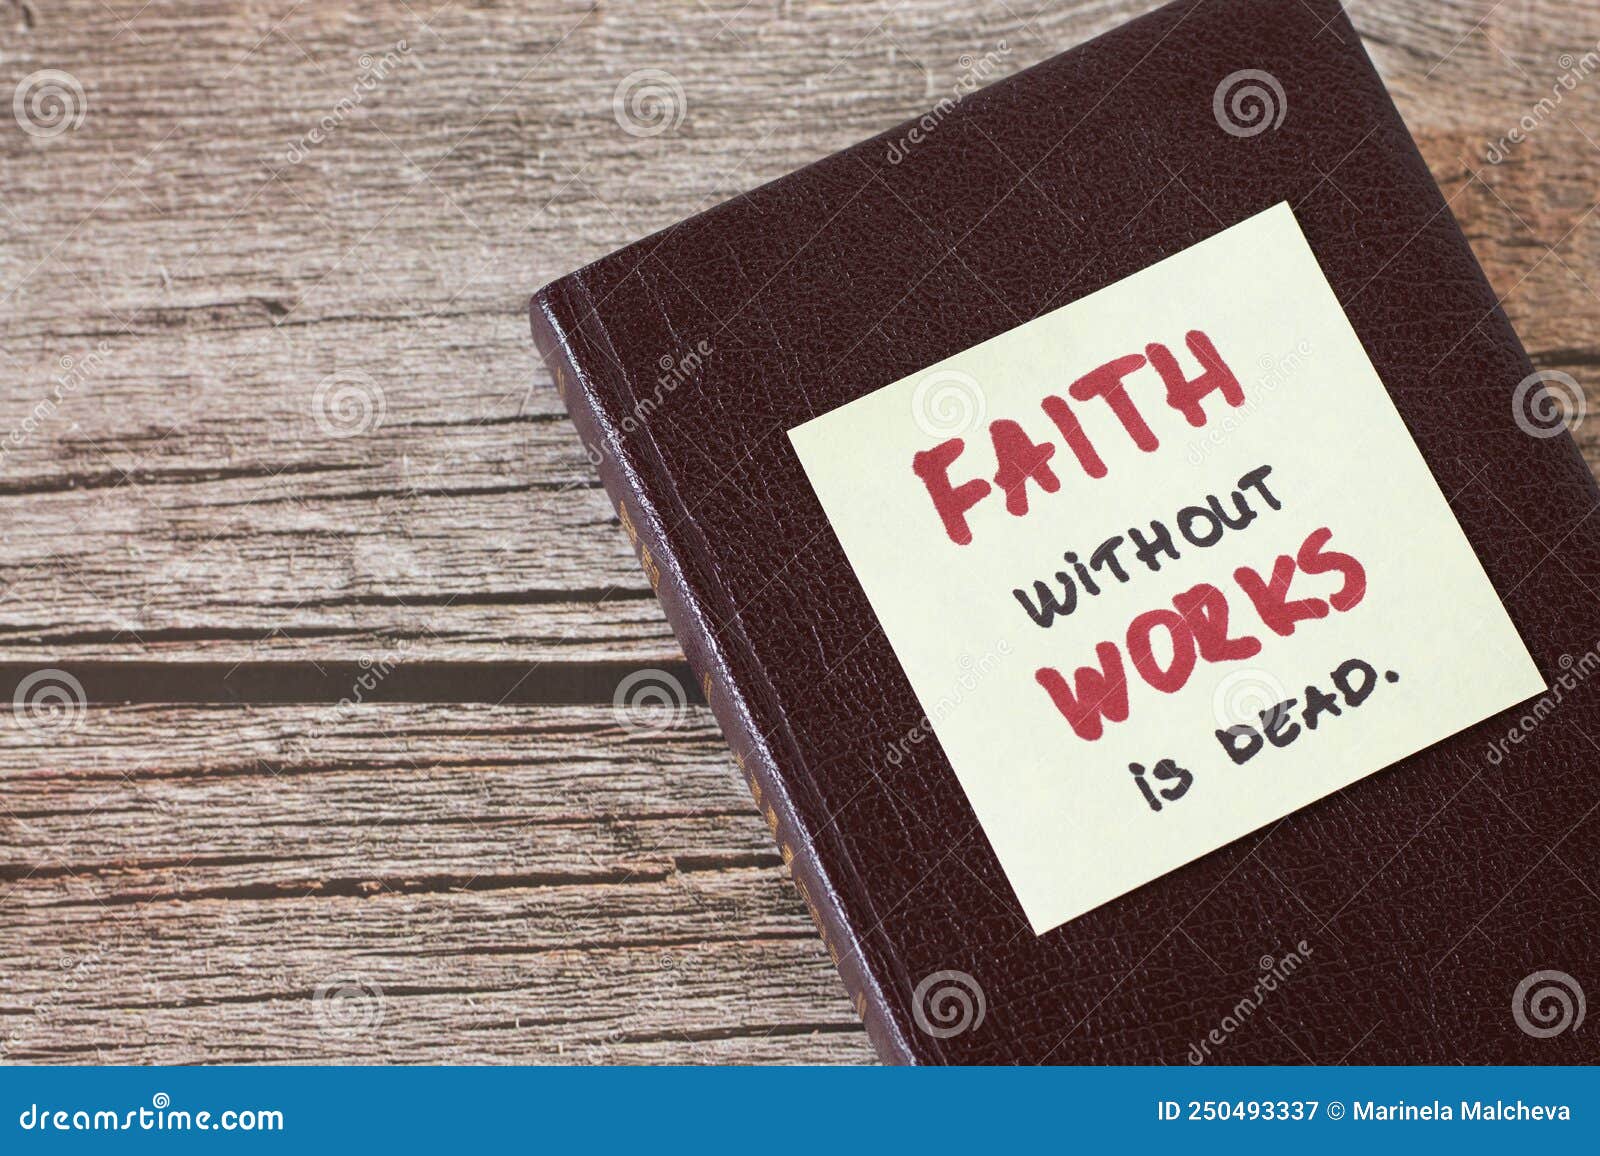 faith without works is dead, a handwritten quote on a note on top of a closed christian holy bible book